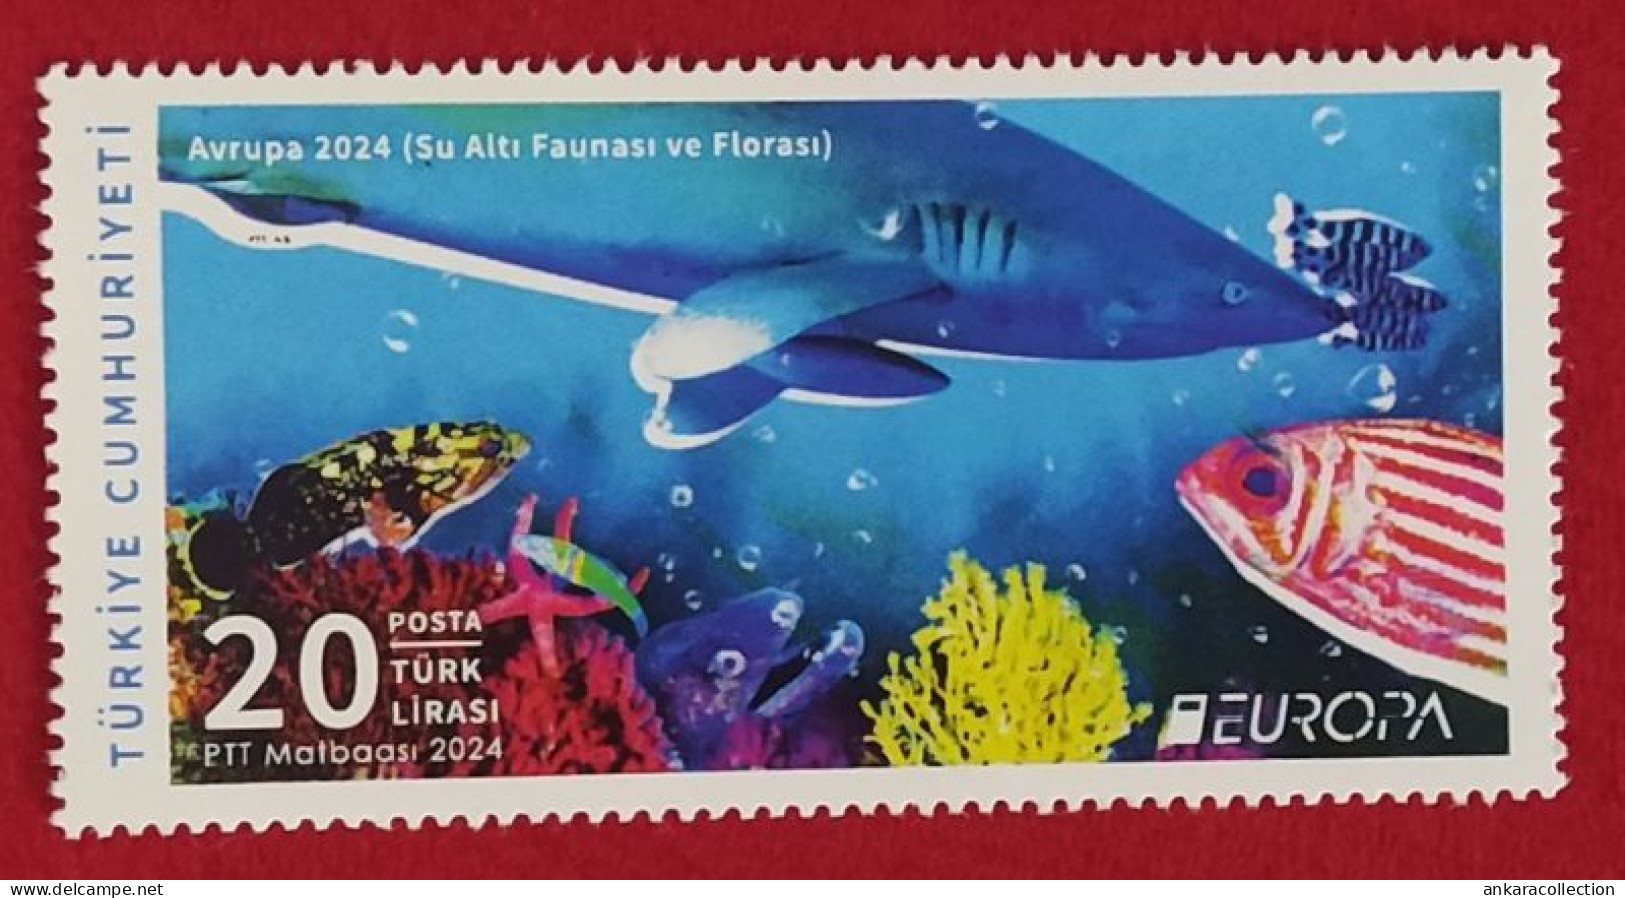 AC - TURKEY STAMP -  EUROPA 2024  UNDERWATER FAUNA AND FLORA  MNH ANKARA, 09 MAY 2024 - Unused Stamps